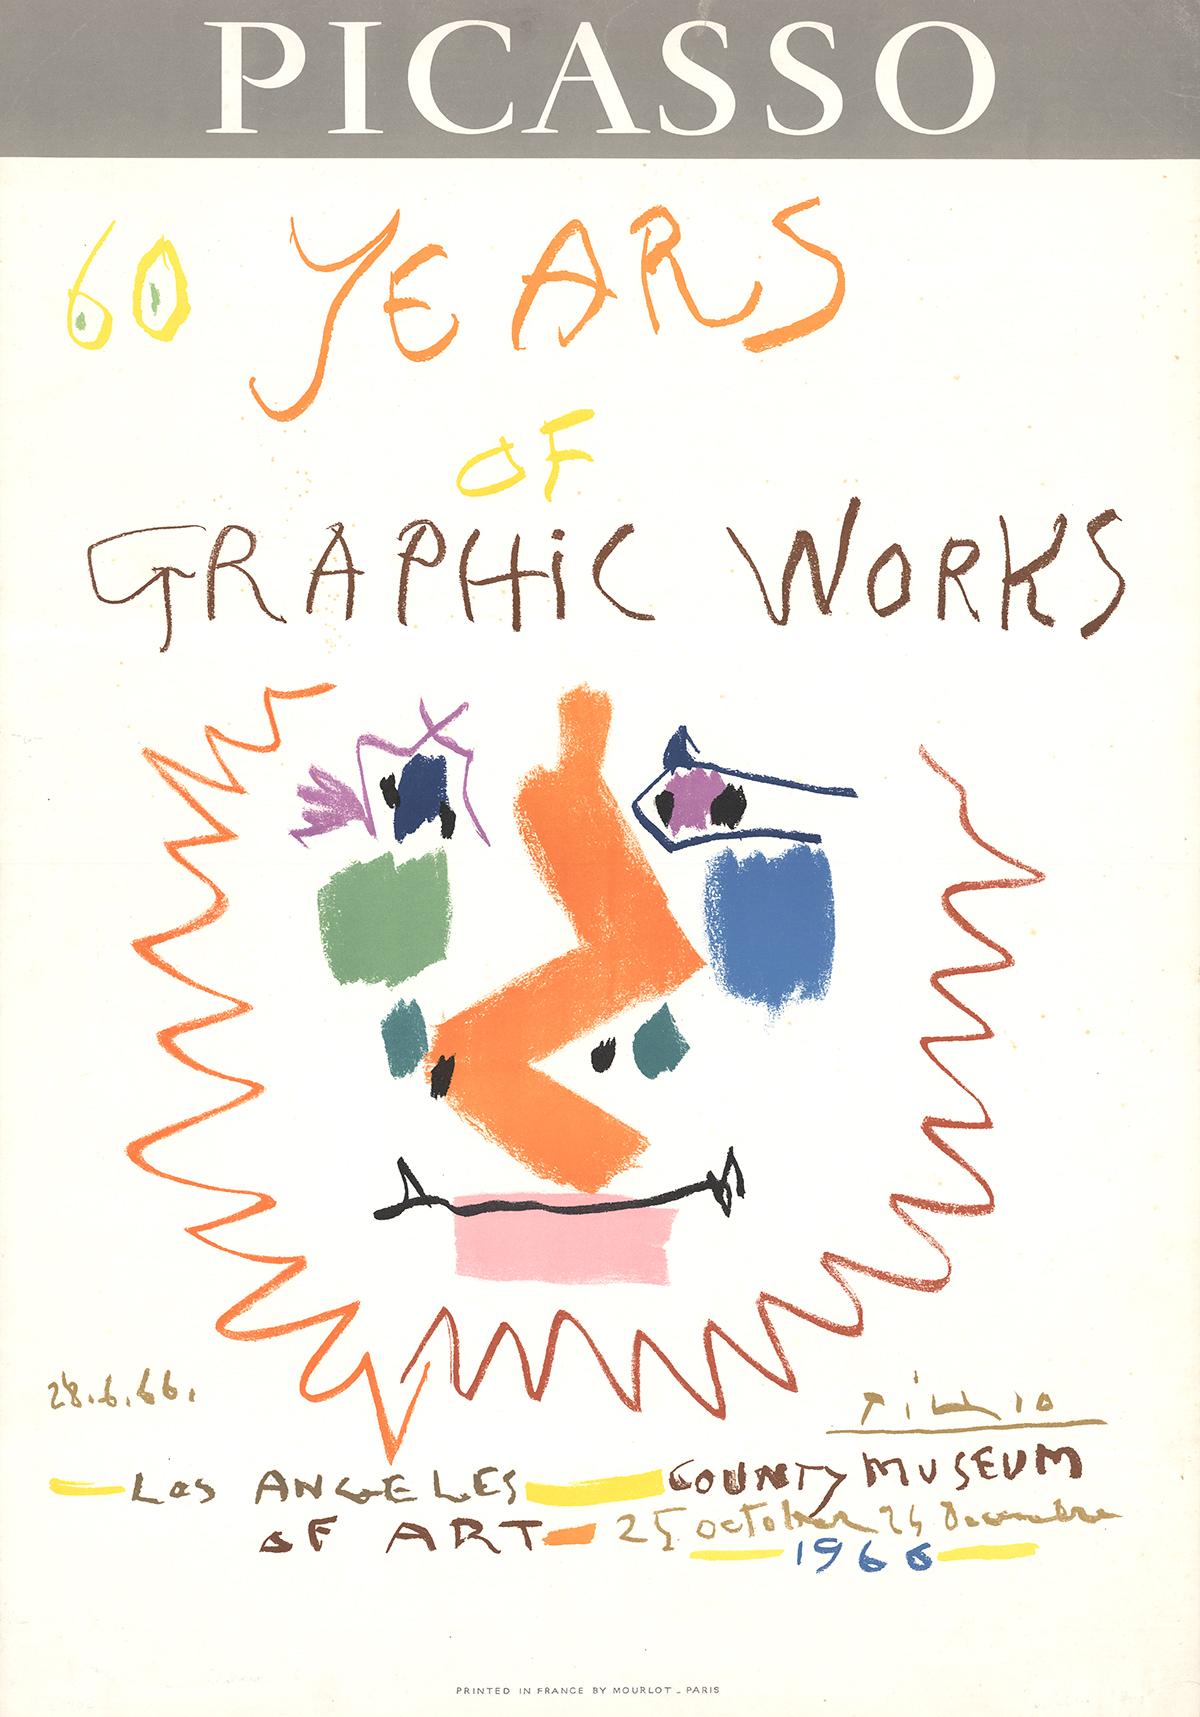 Exhibition Poster 60 Years of Graphic Works-ORIGINAL LITHOGRAPH - Print by Pablo Picasso